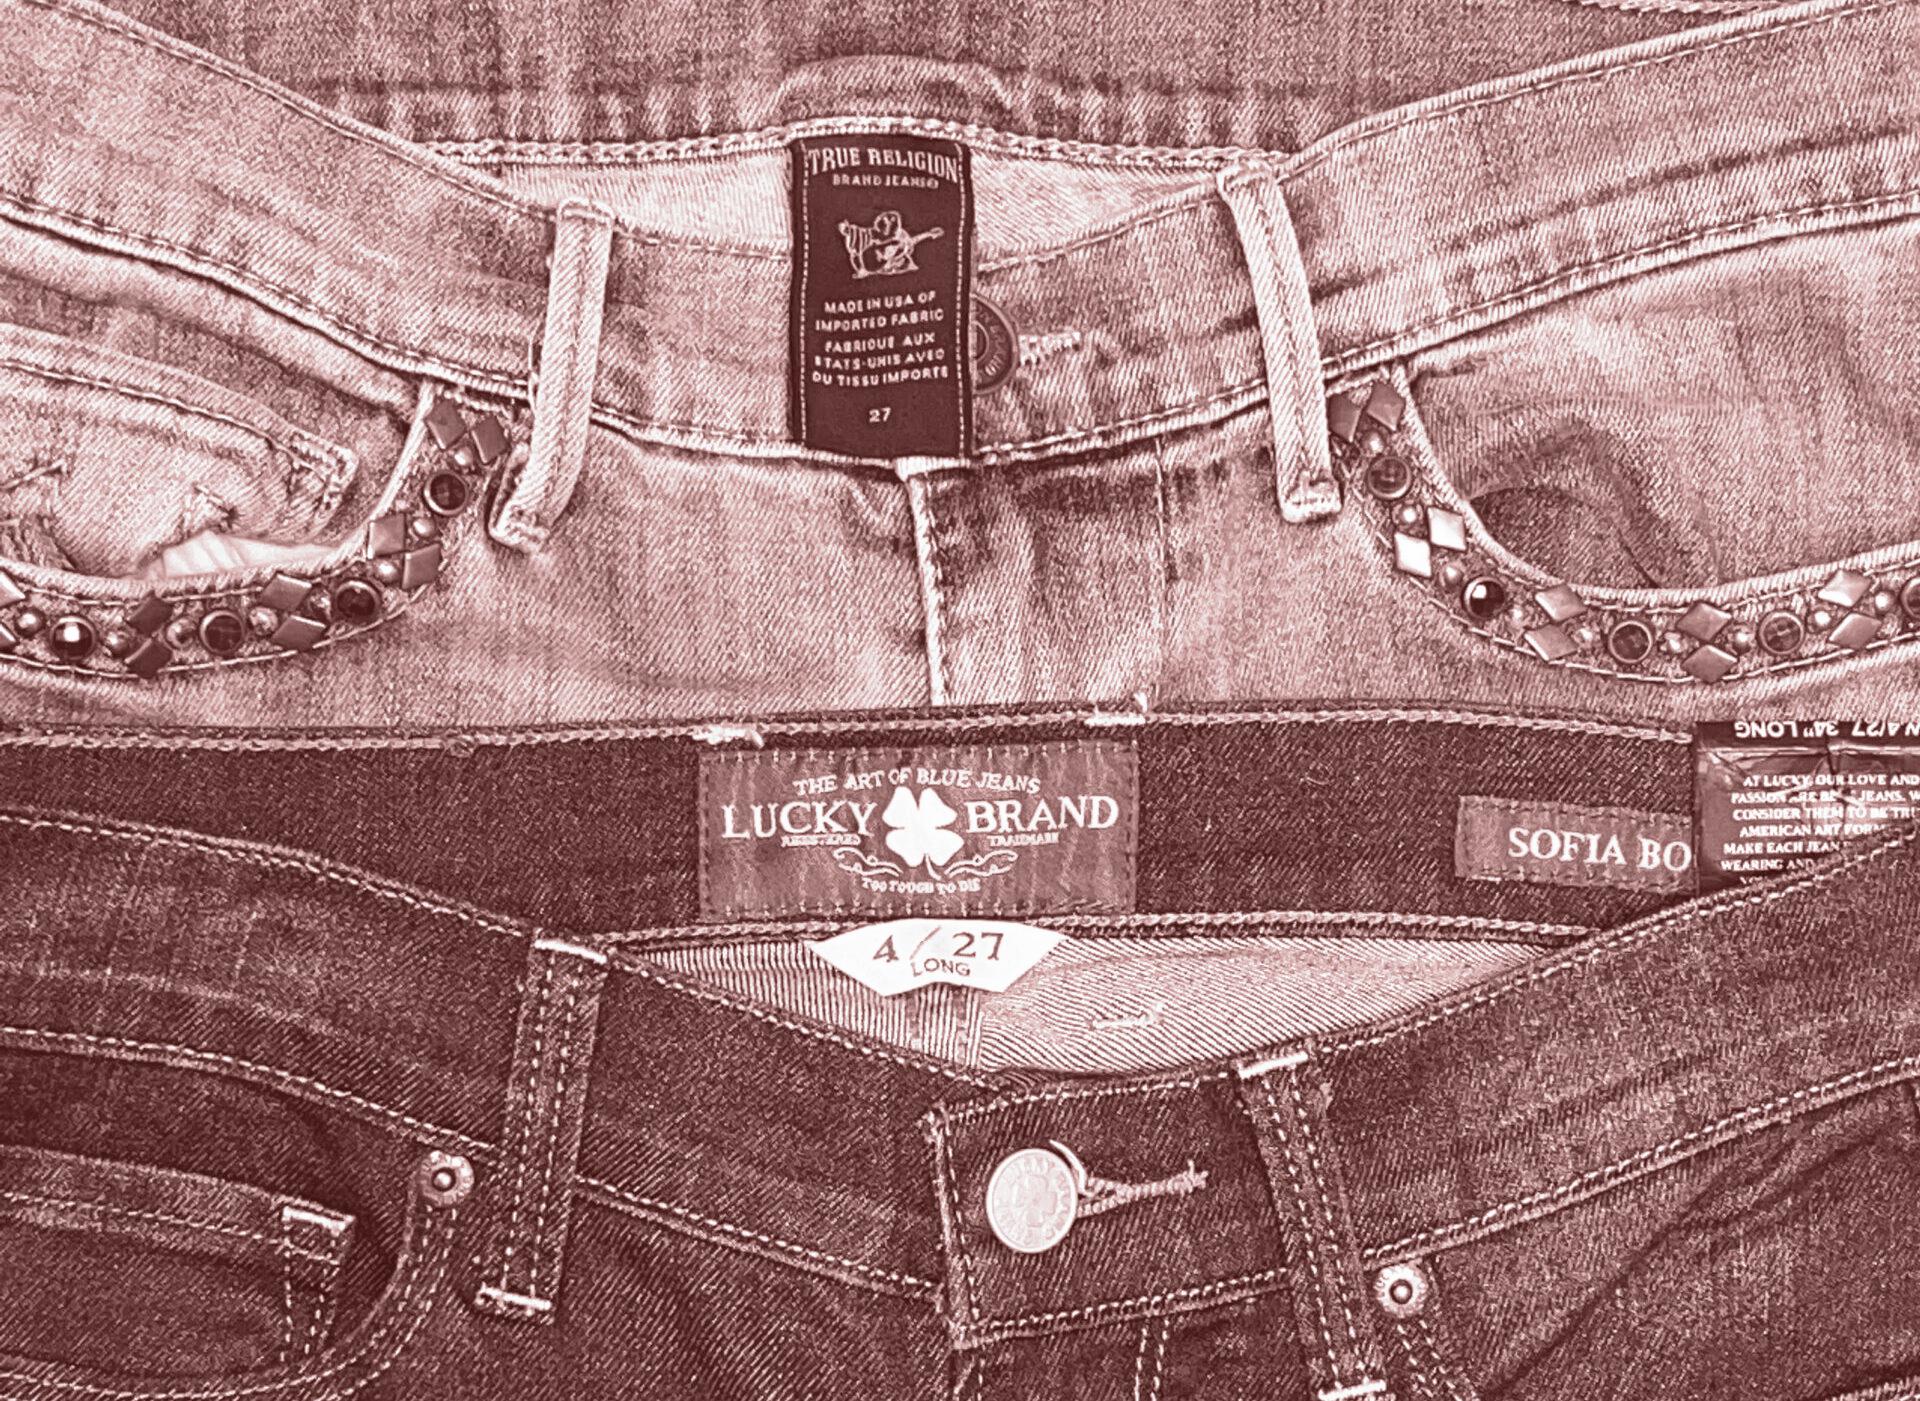 Lucky Brand Jeans Vintage